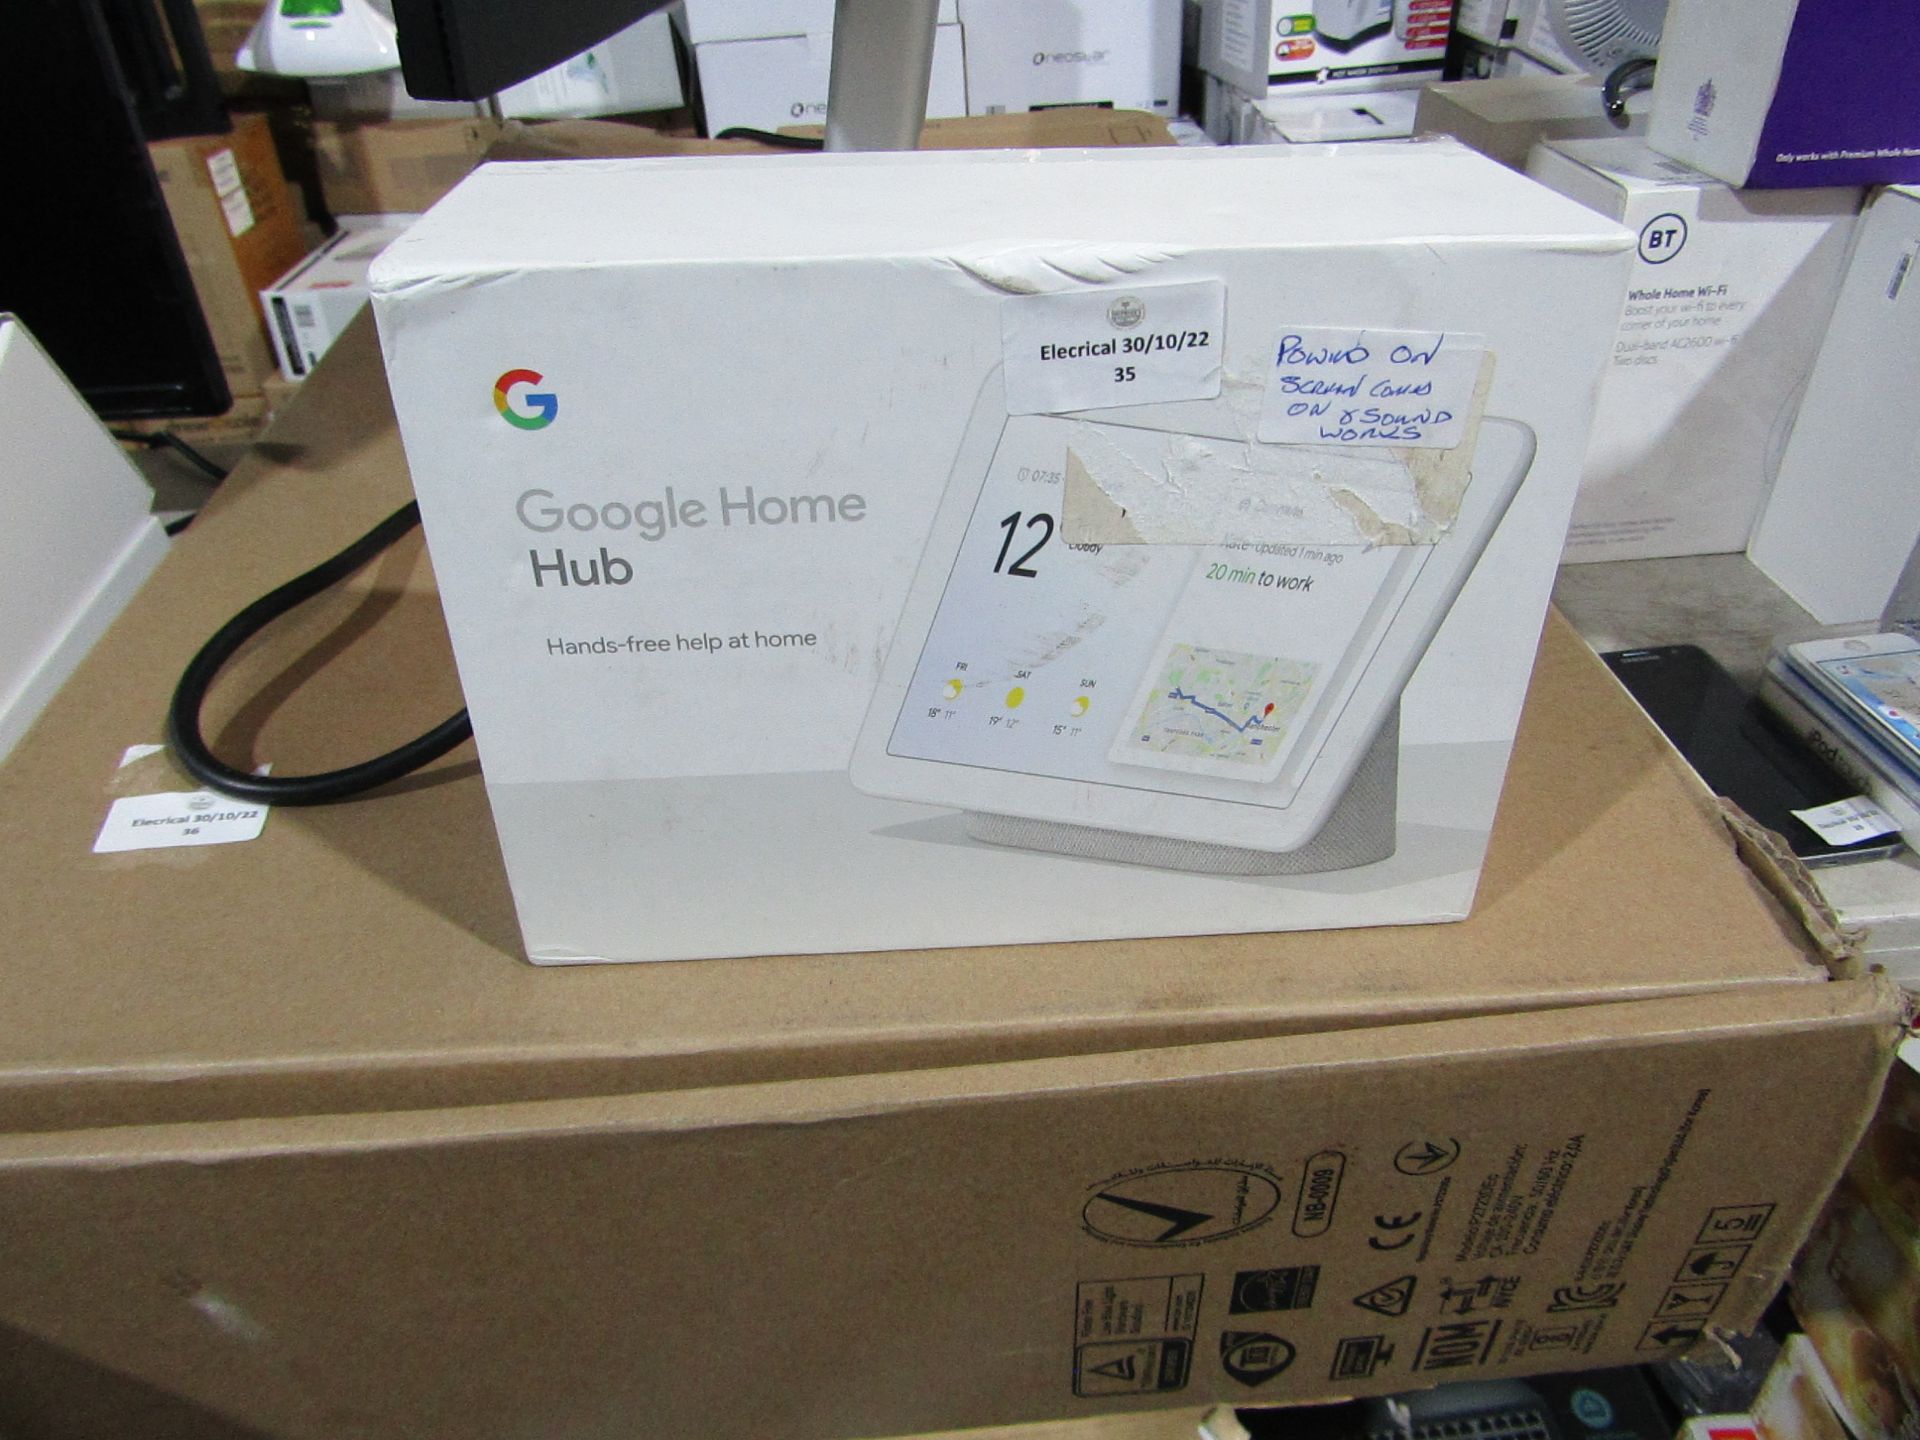 Google Home Hub Chalk in orginal box powers on screen comes on and soundsworks